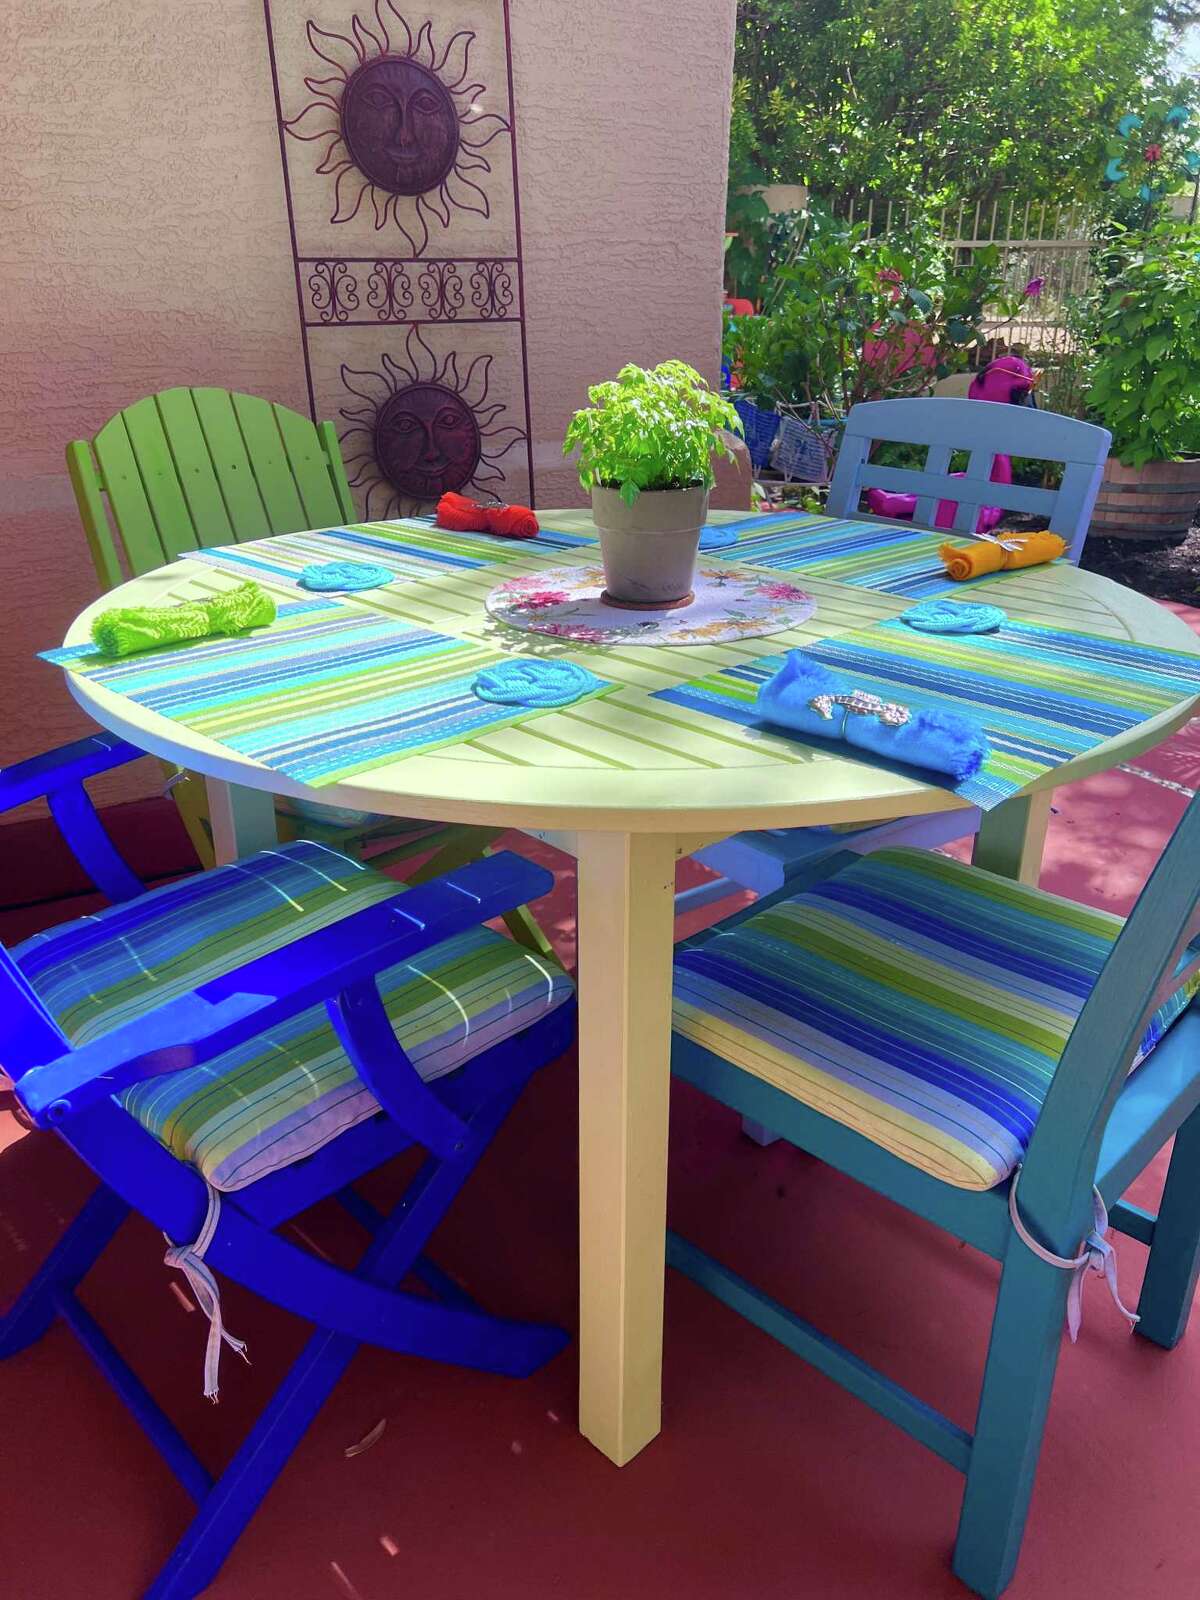 While some of the patio decor was shipped from Mexico, other pieces, like the wood dining table that Susan painted, came from no further than World Market.